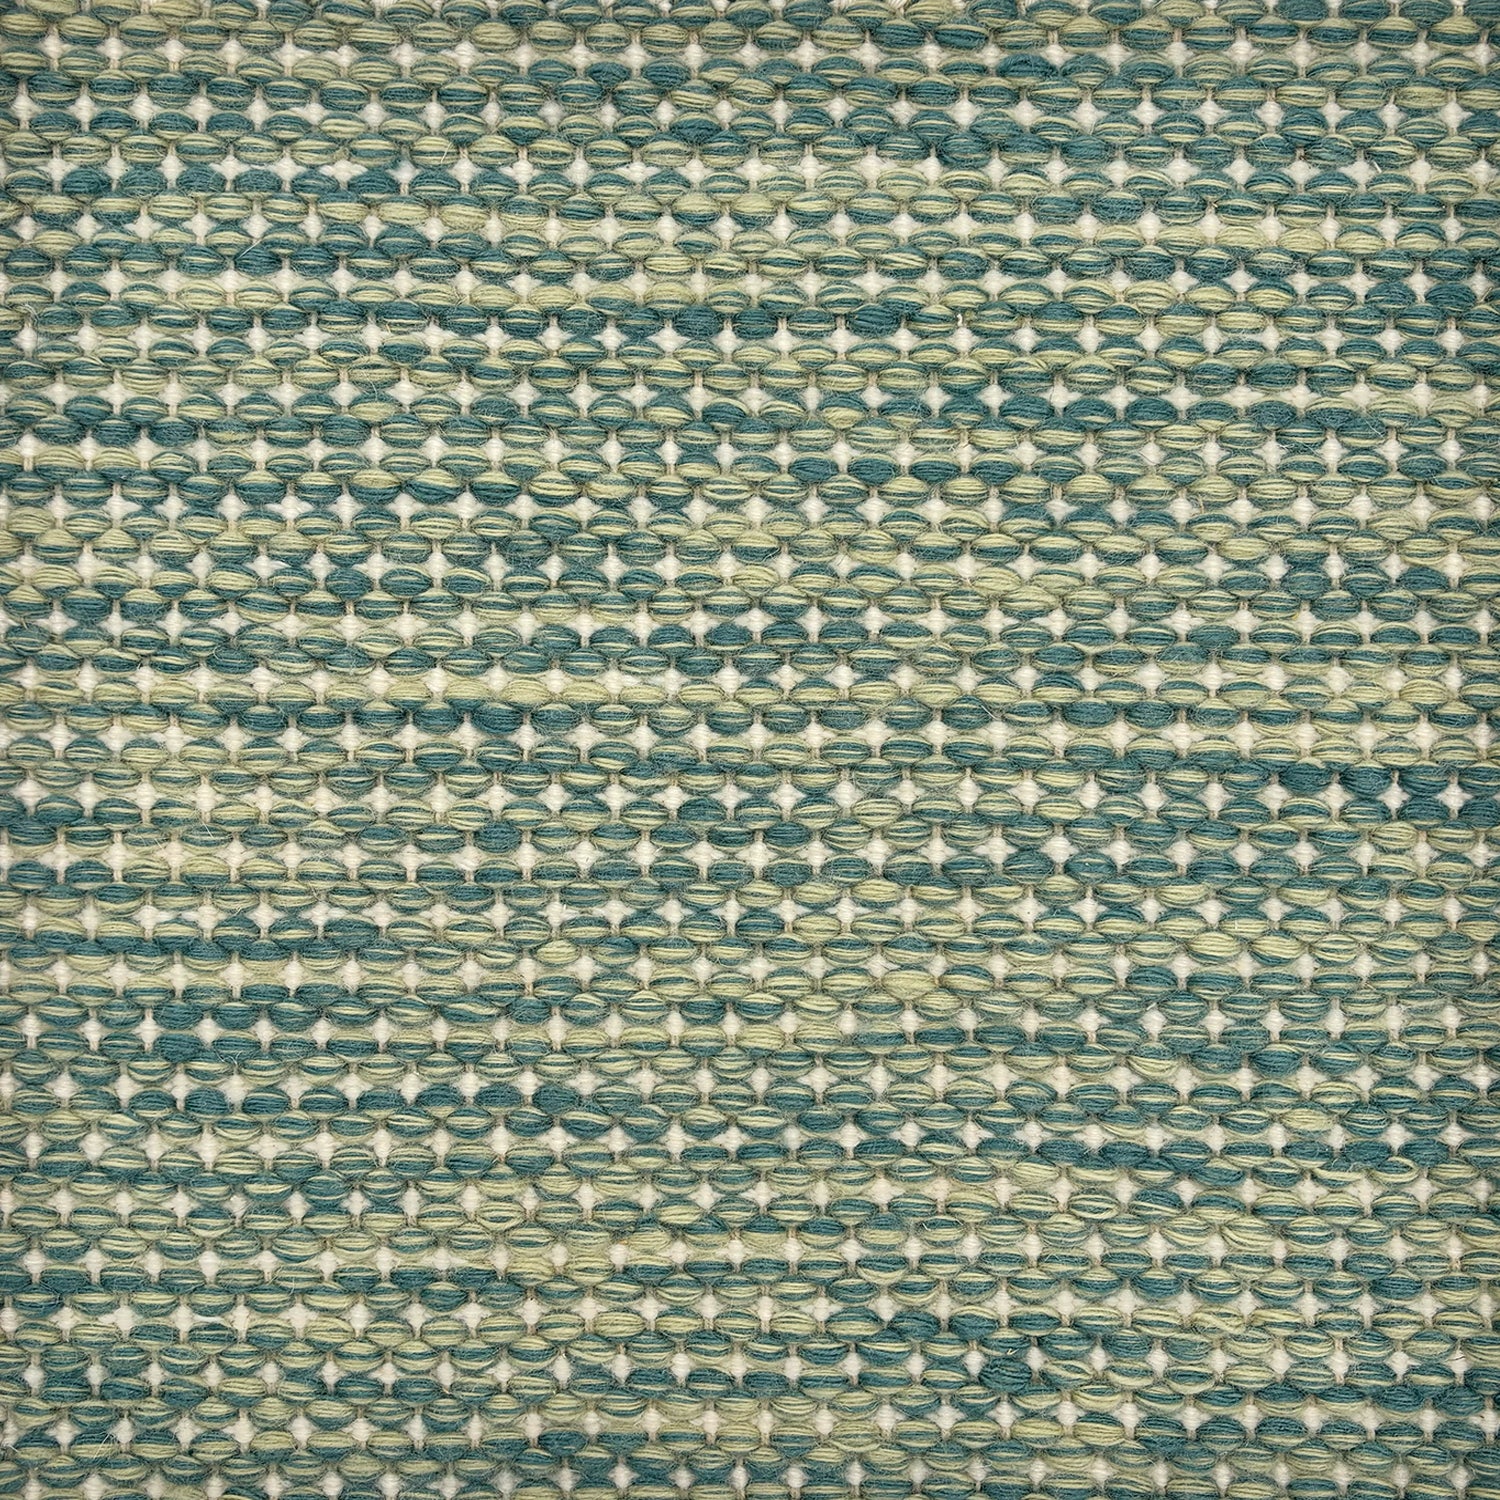 Detail of a handowven rug with a textural strié pattern in shades of green